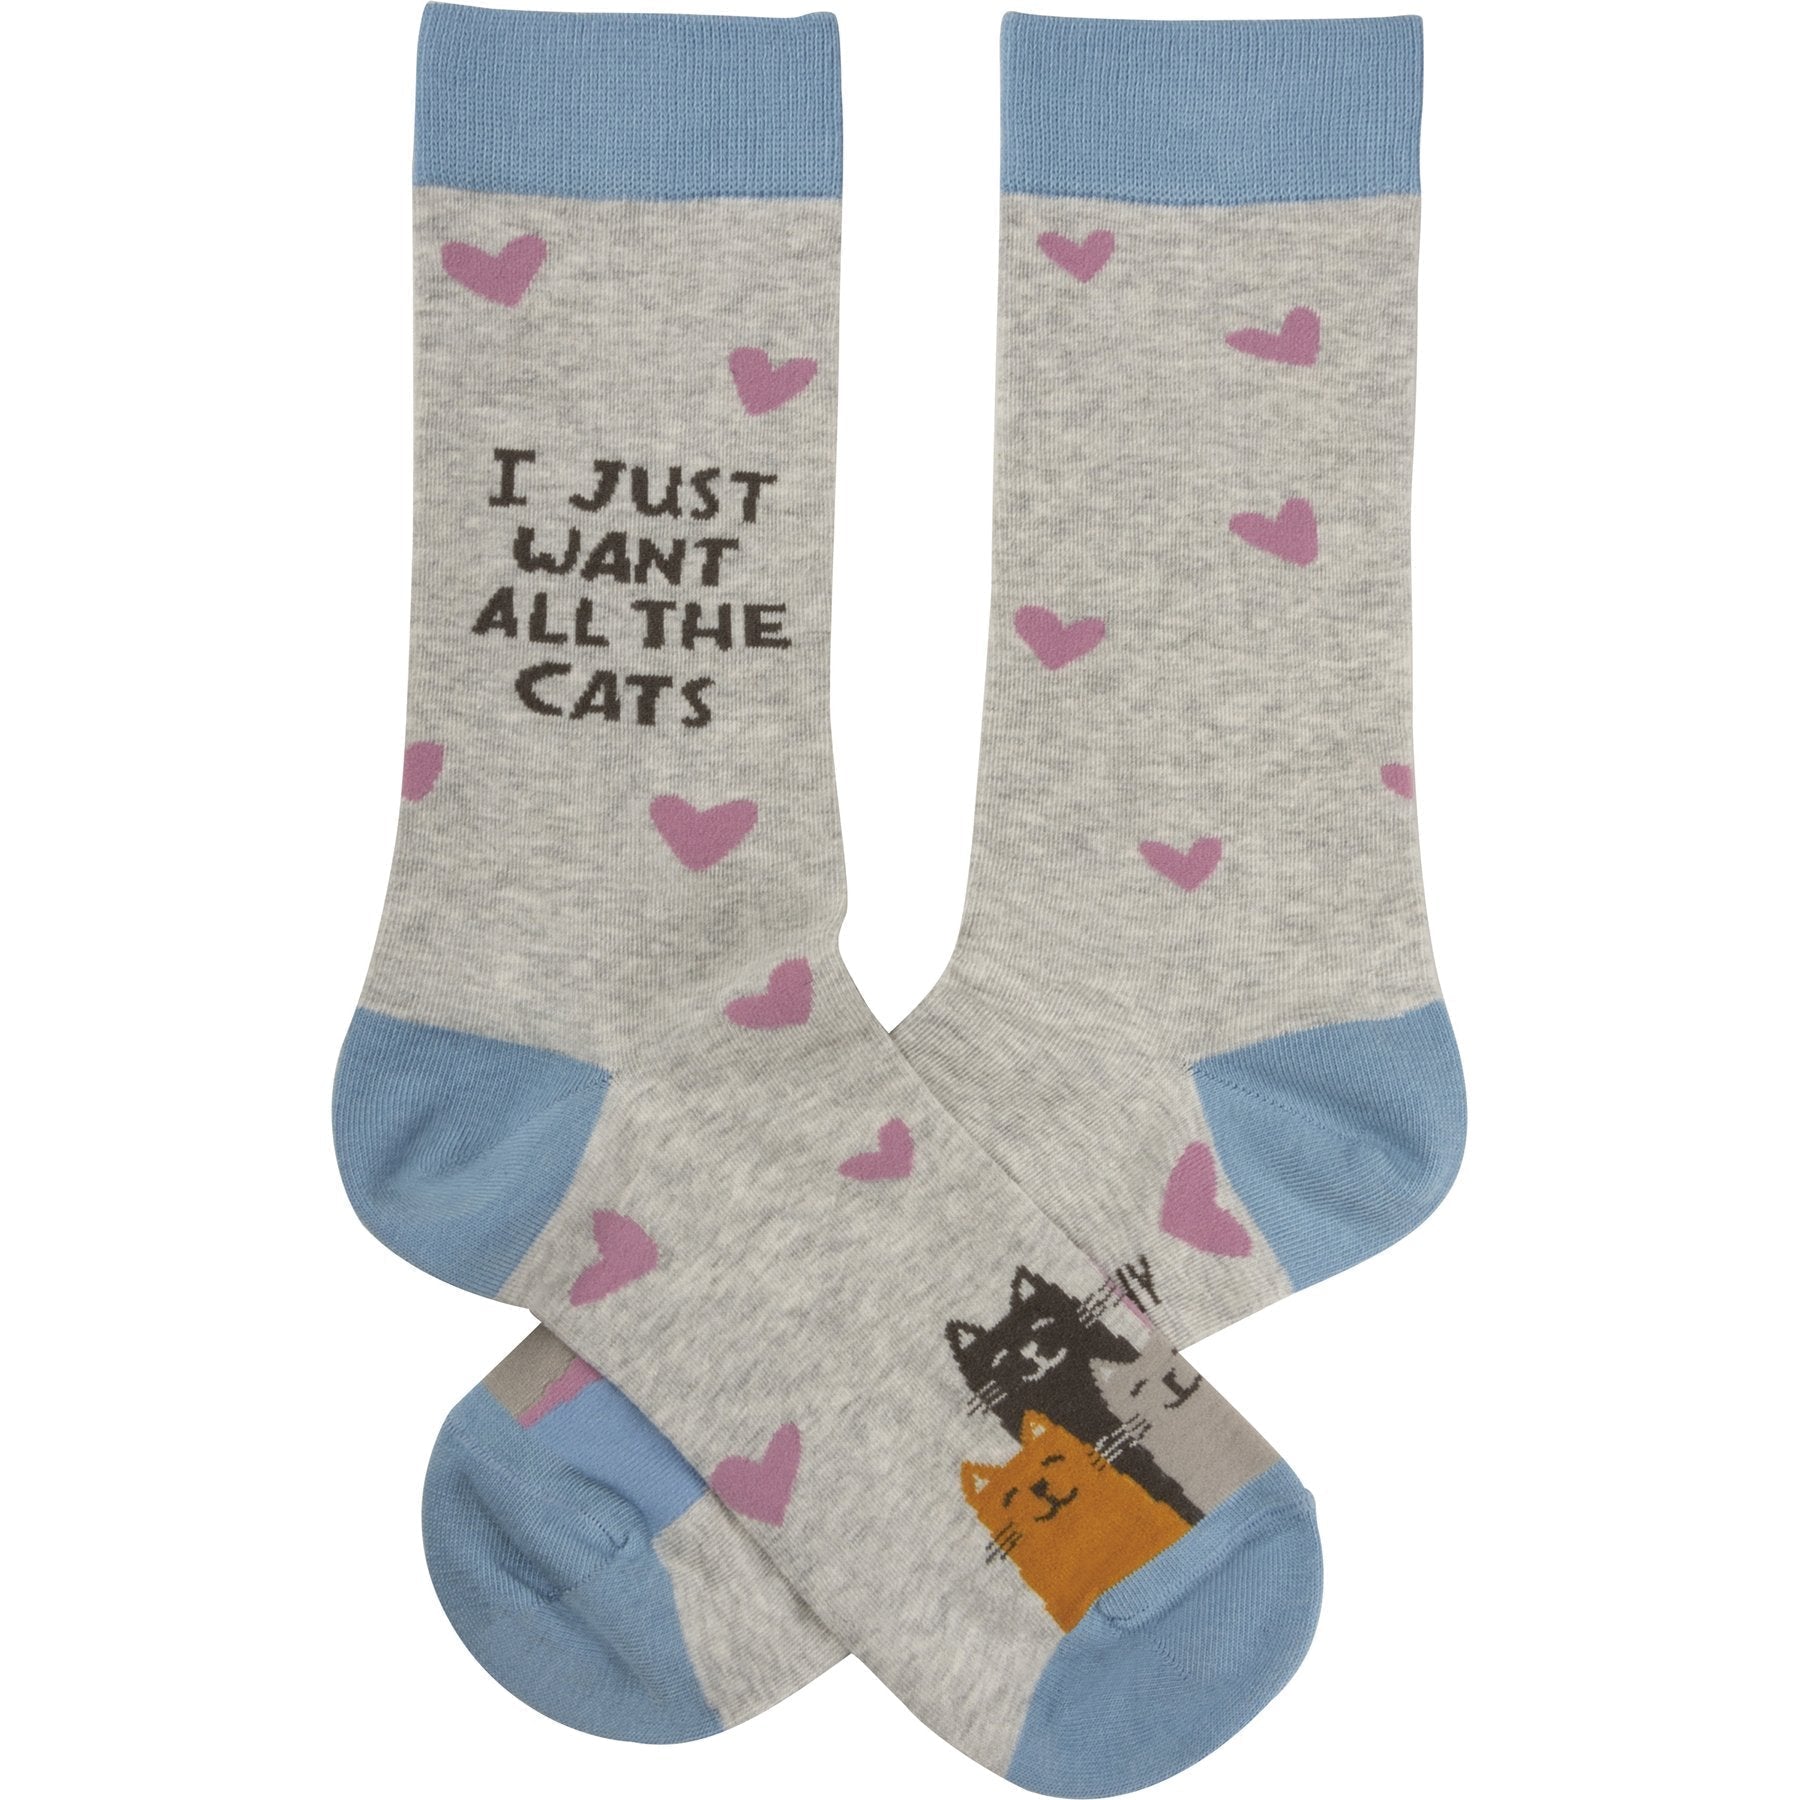 Socks With Cats On Them, I Just Want All The Cats Socks